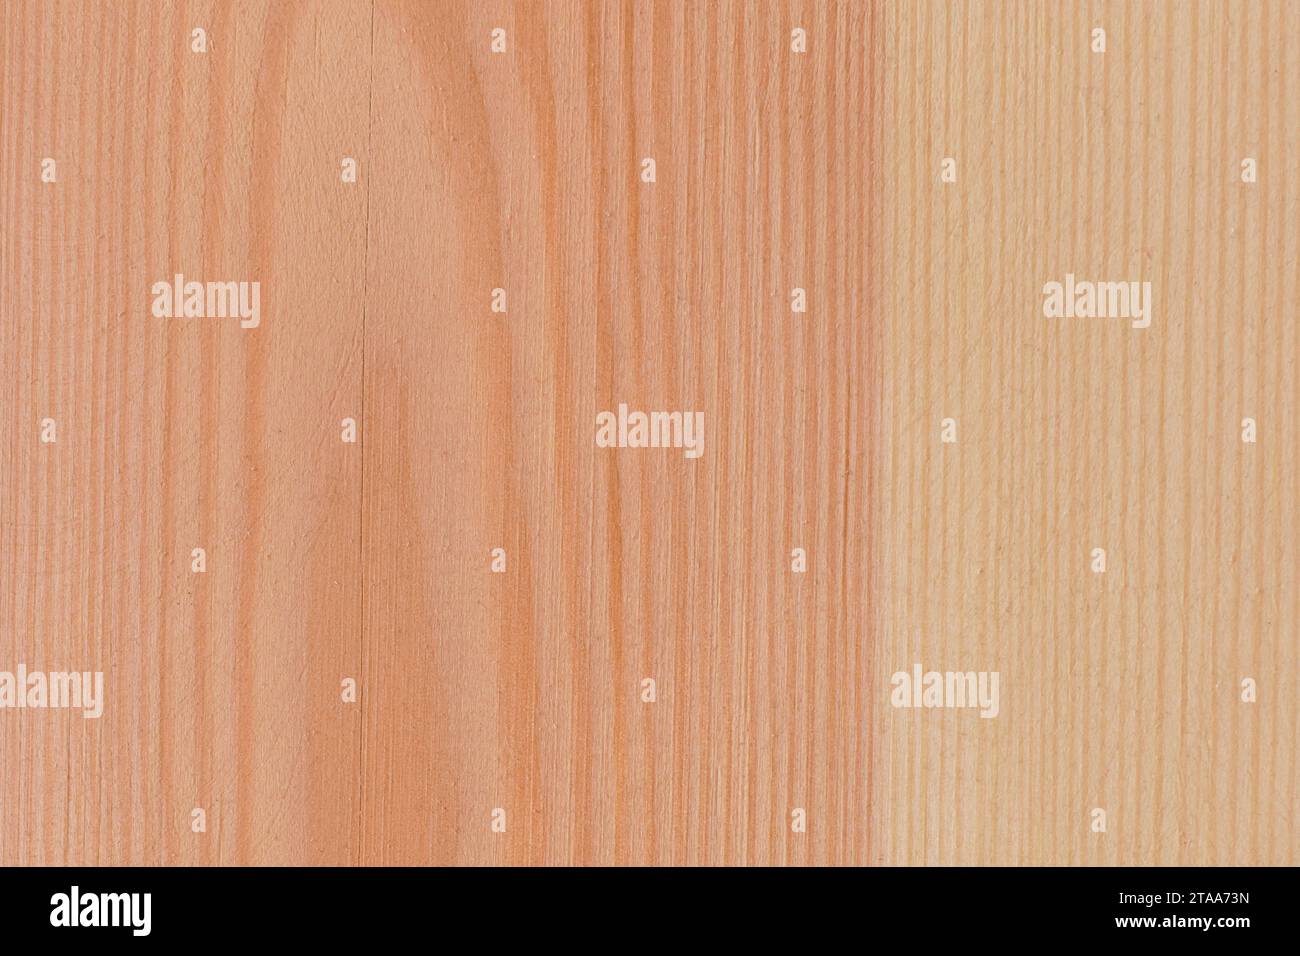 Color Warm Shade Wooden Table Texture Abstract Natural Pattern Wood Background Plank Surface. Stock Photo